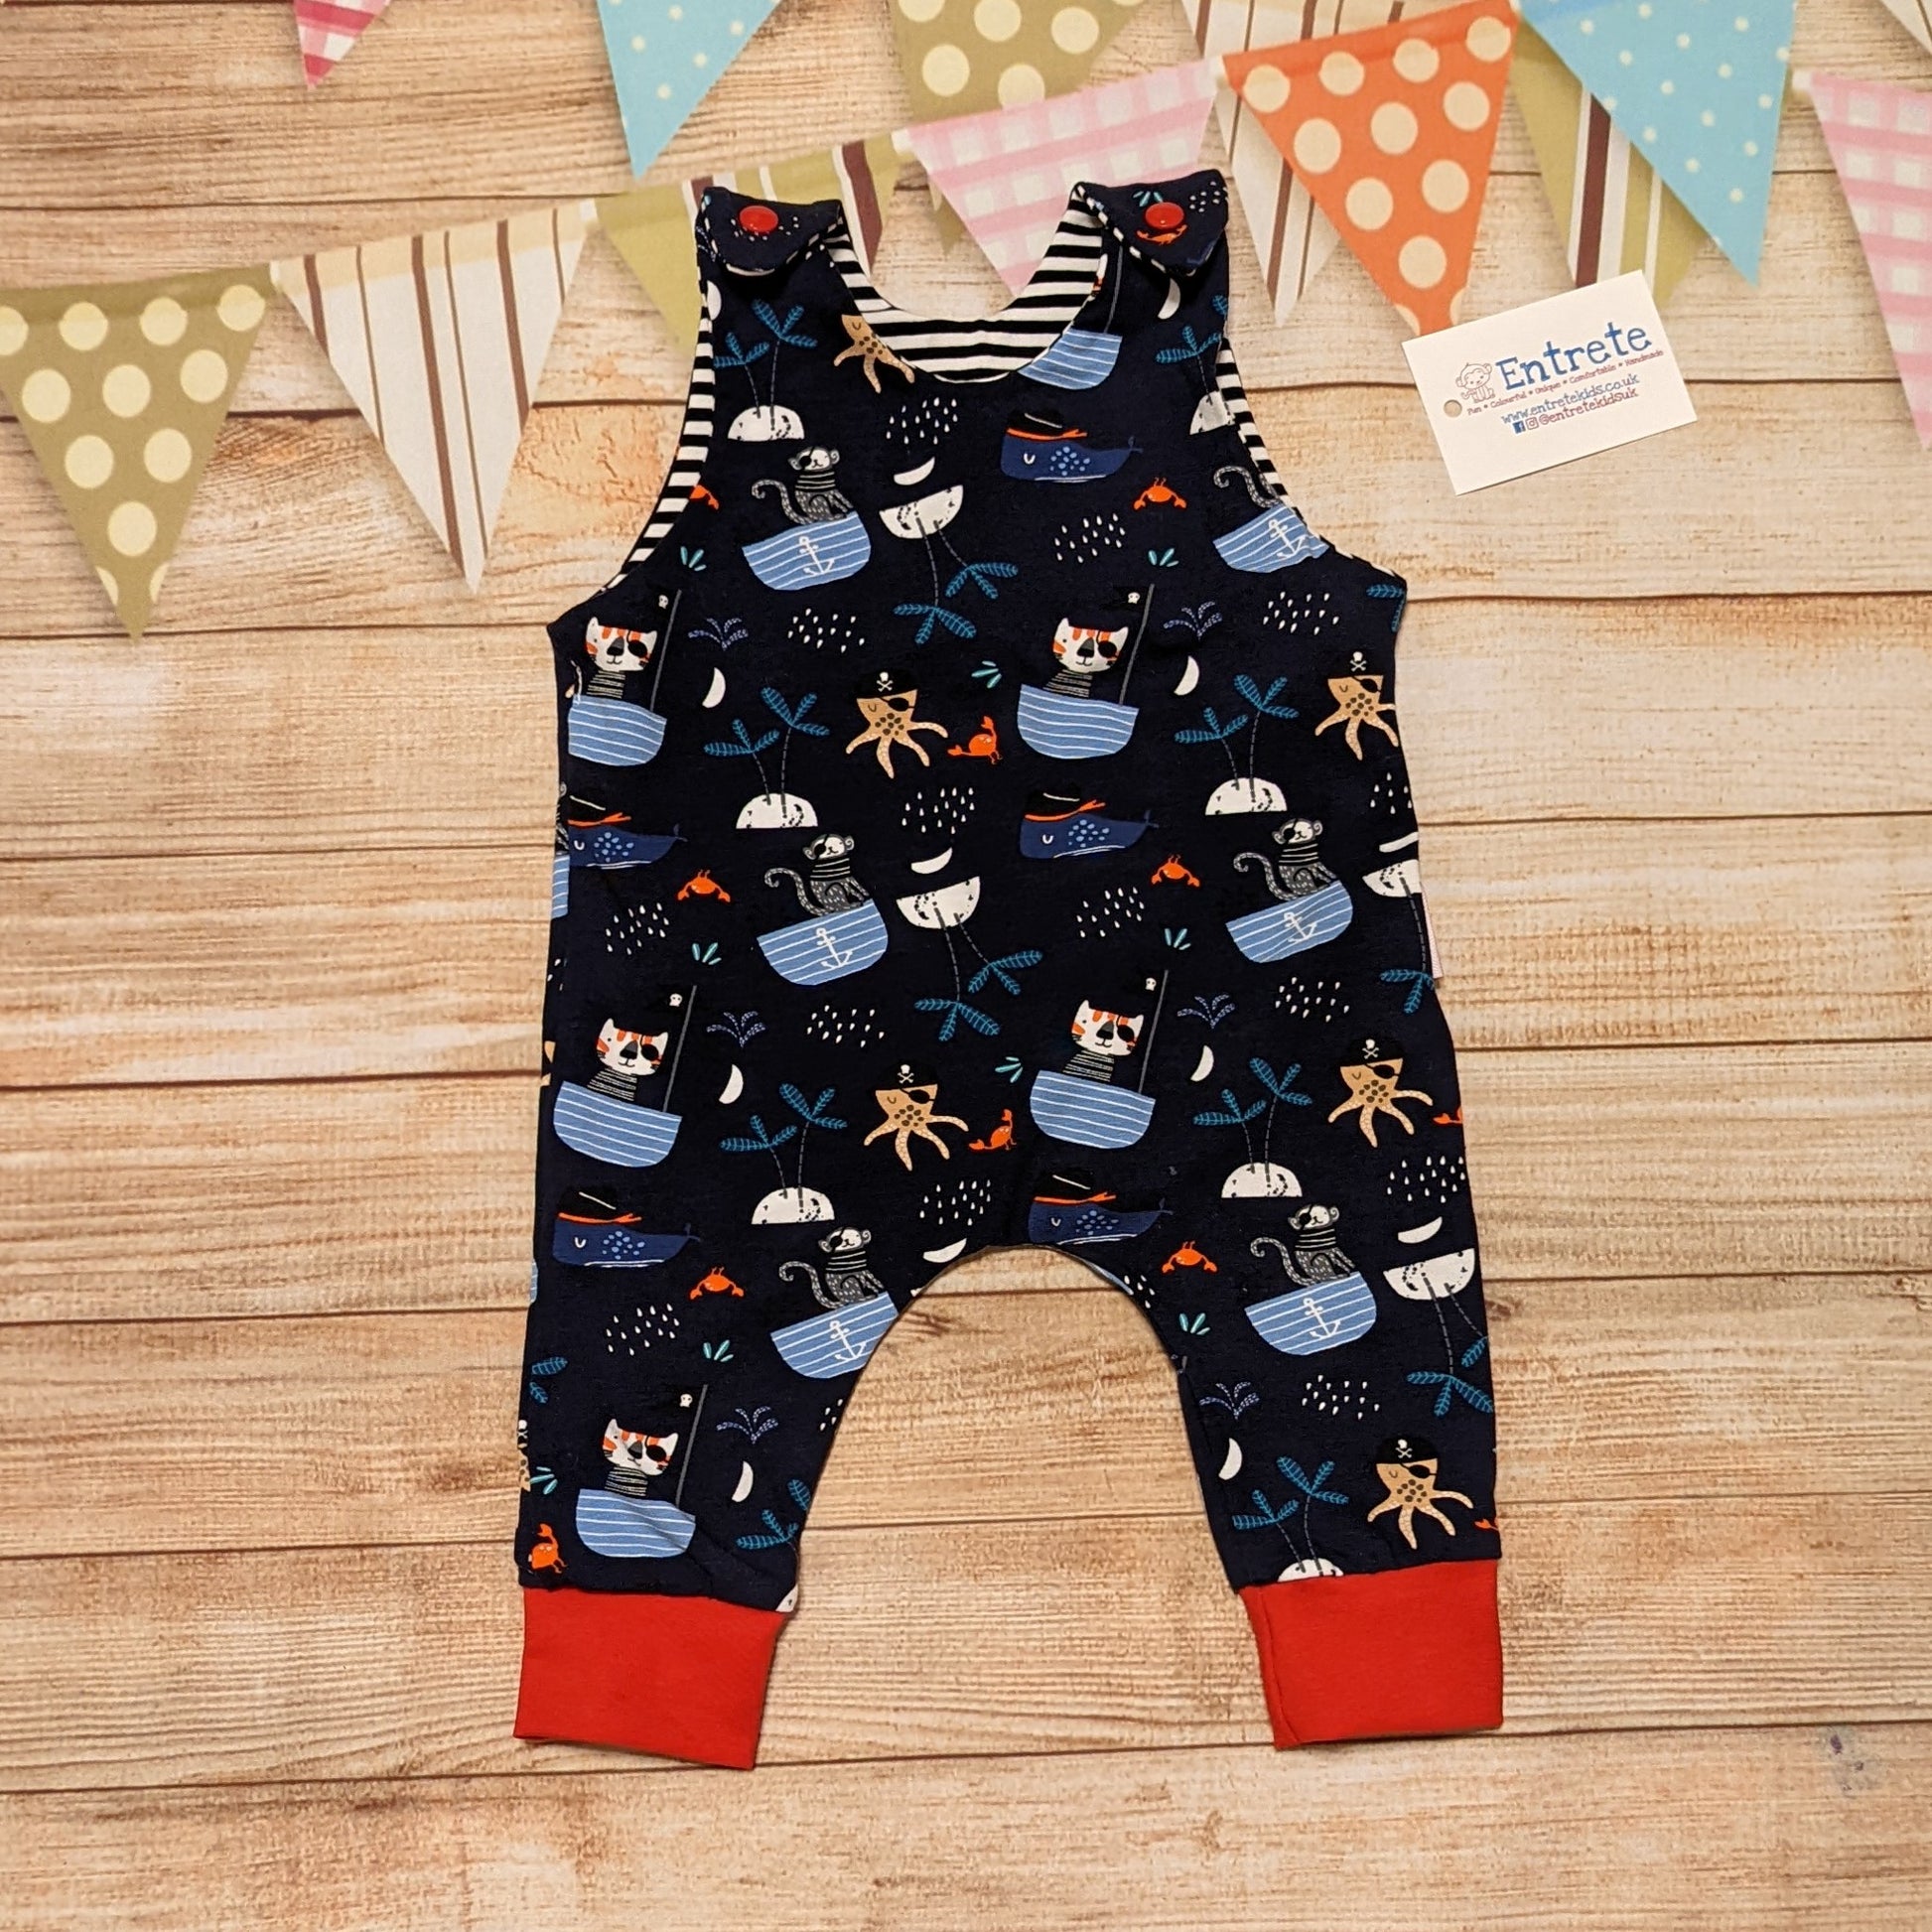 Fun and adventure await, with the pirate cats sleeveless romper. Handmade using pirate cats, red and monochrome striped cotton jersey's.